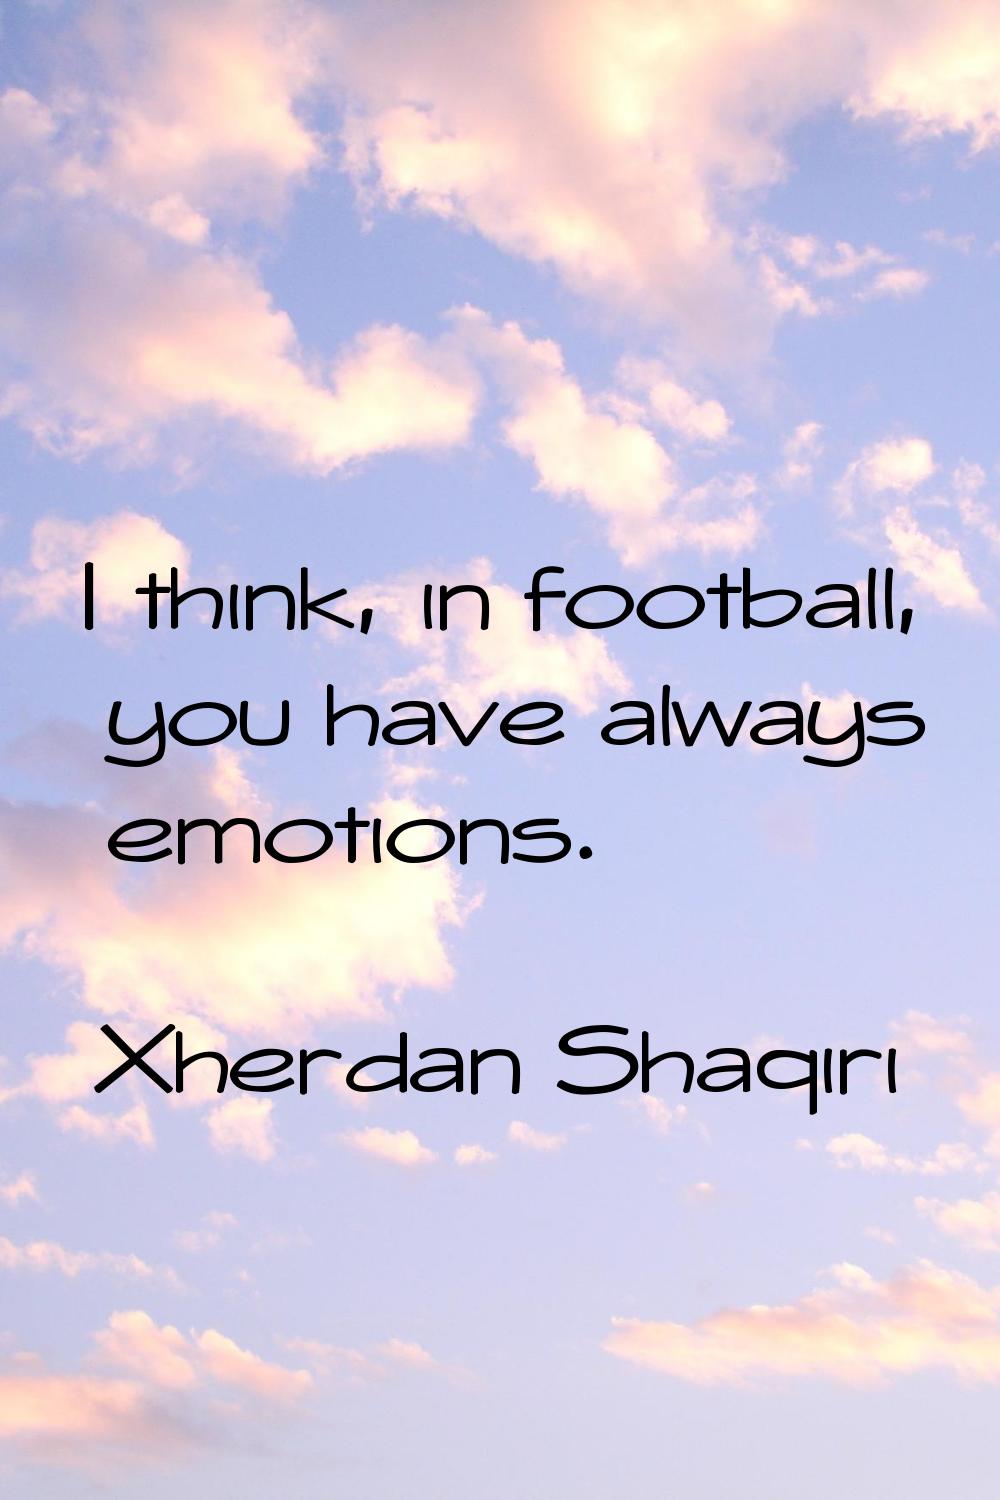 I think, in football, you have always emotions.